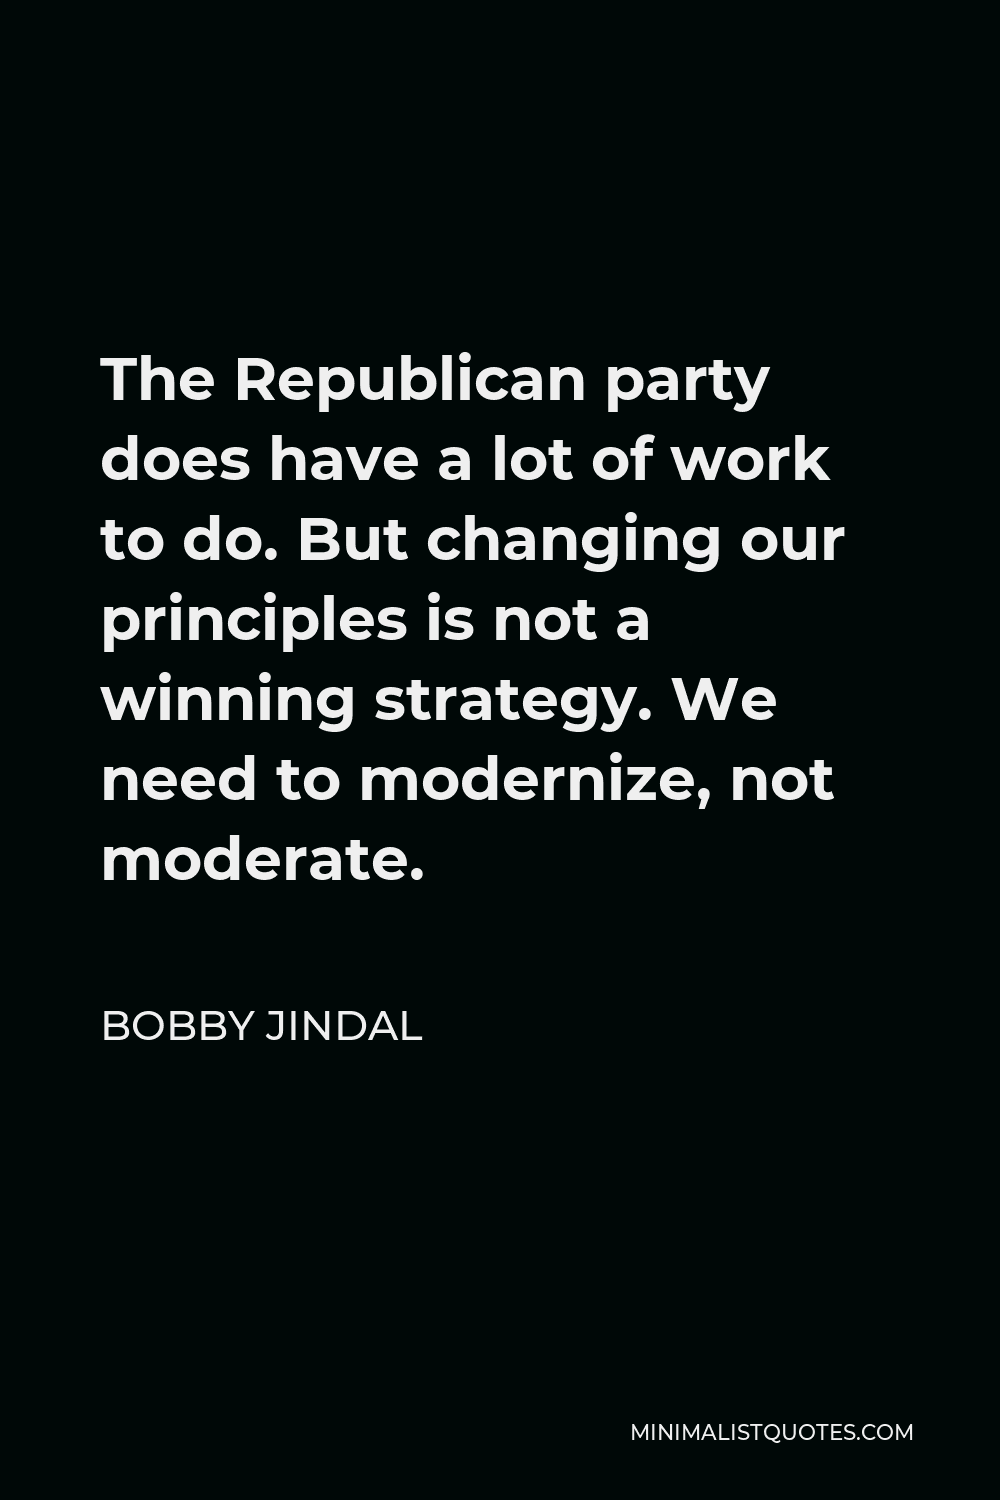 Bobby Jindal Quote - The Republican party does have a lot of work to do. But changing our principles is not a winning strategy. We need to modernize, not moderate.